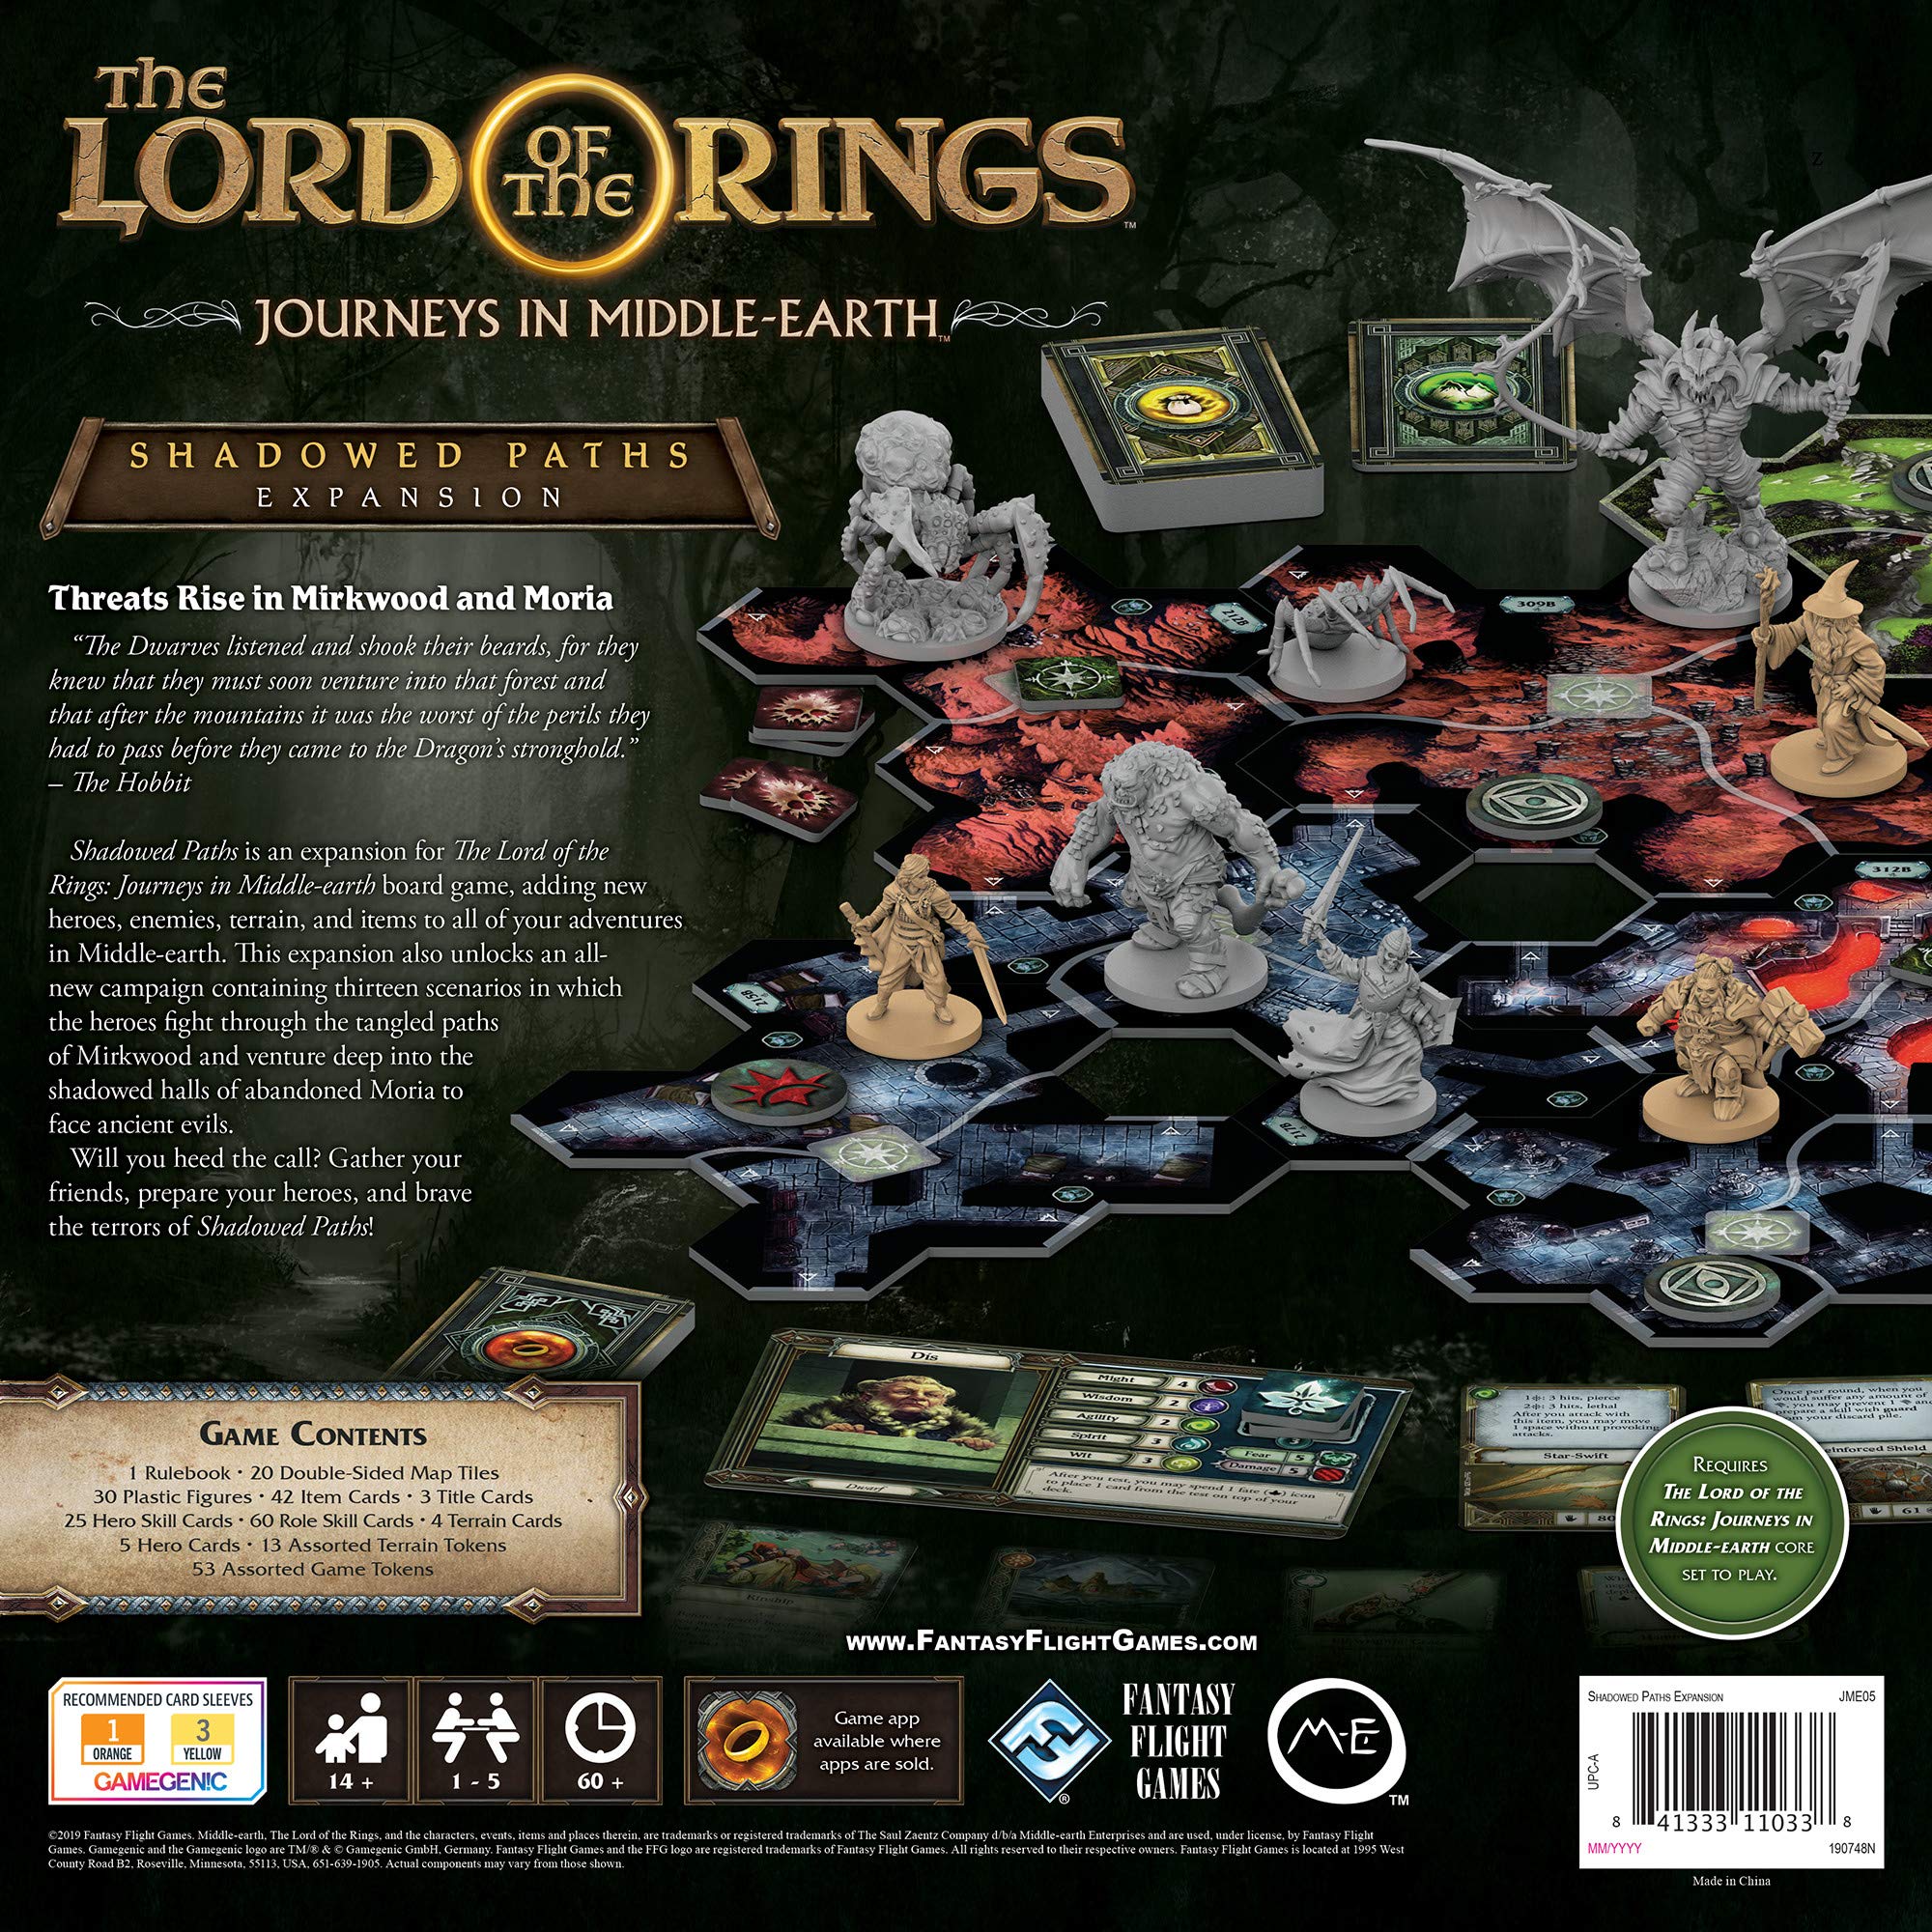 The Lord of the Rings Journeys in Middle-earth Shadowed Paths Board Game EXPANSION - Adventure Board Game for Kids and Adults, Ages 14+, 1-5 Players, 60+ Minute Playtime, Made by Fantasy Flight Games